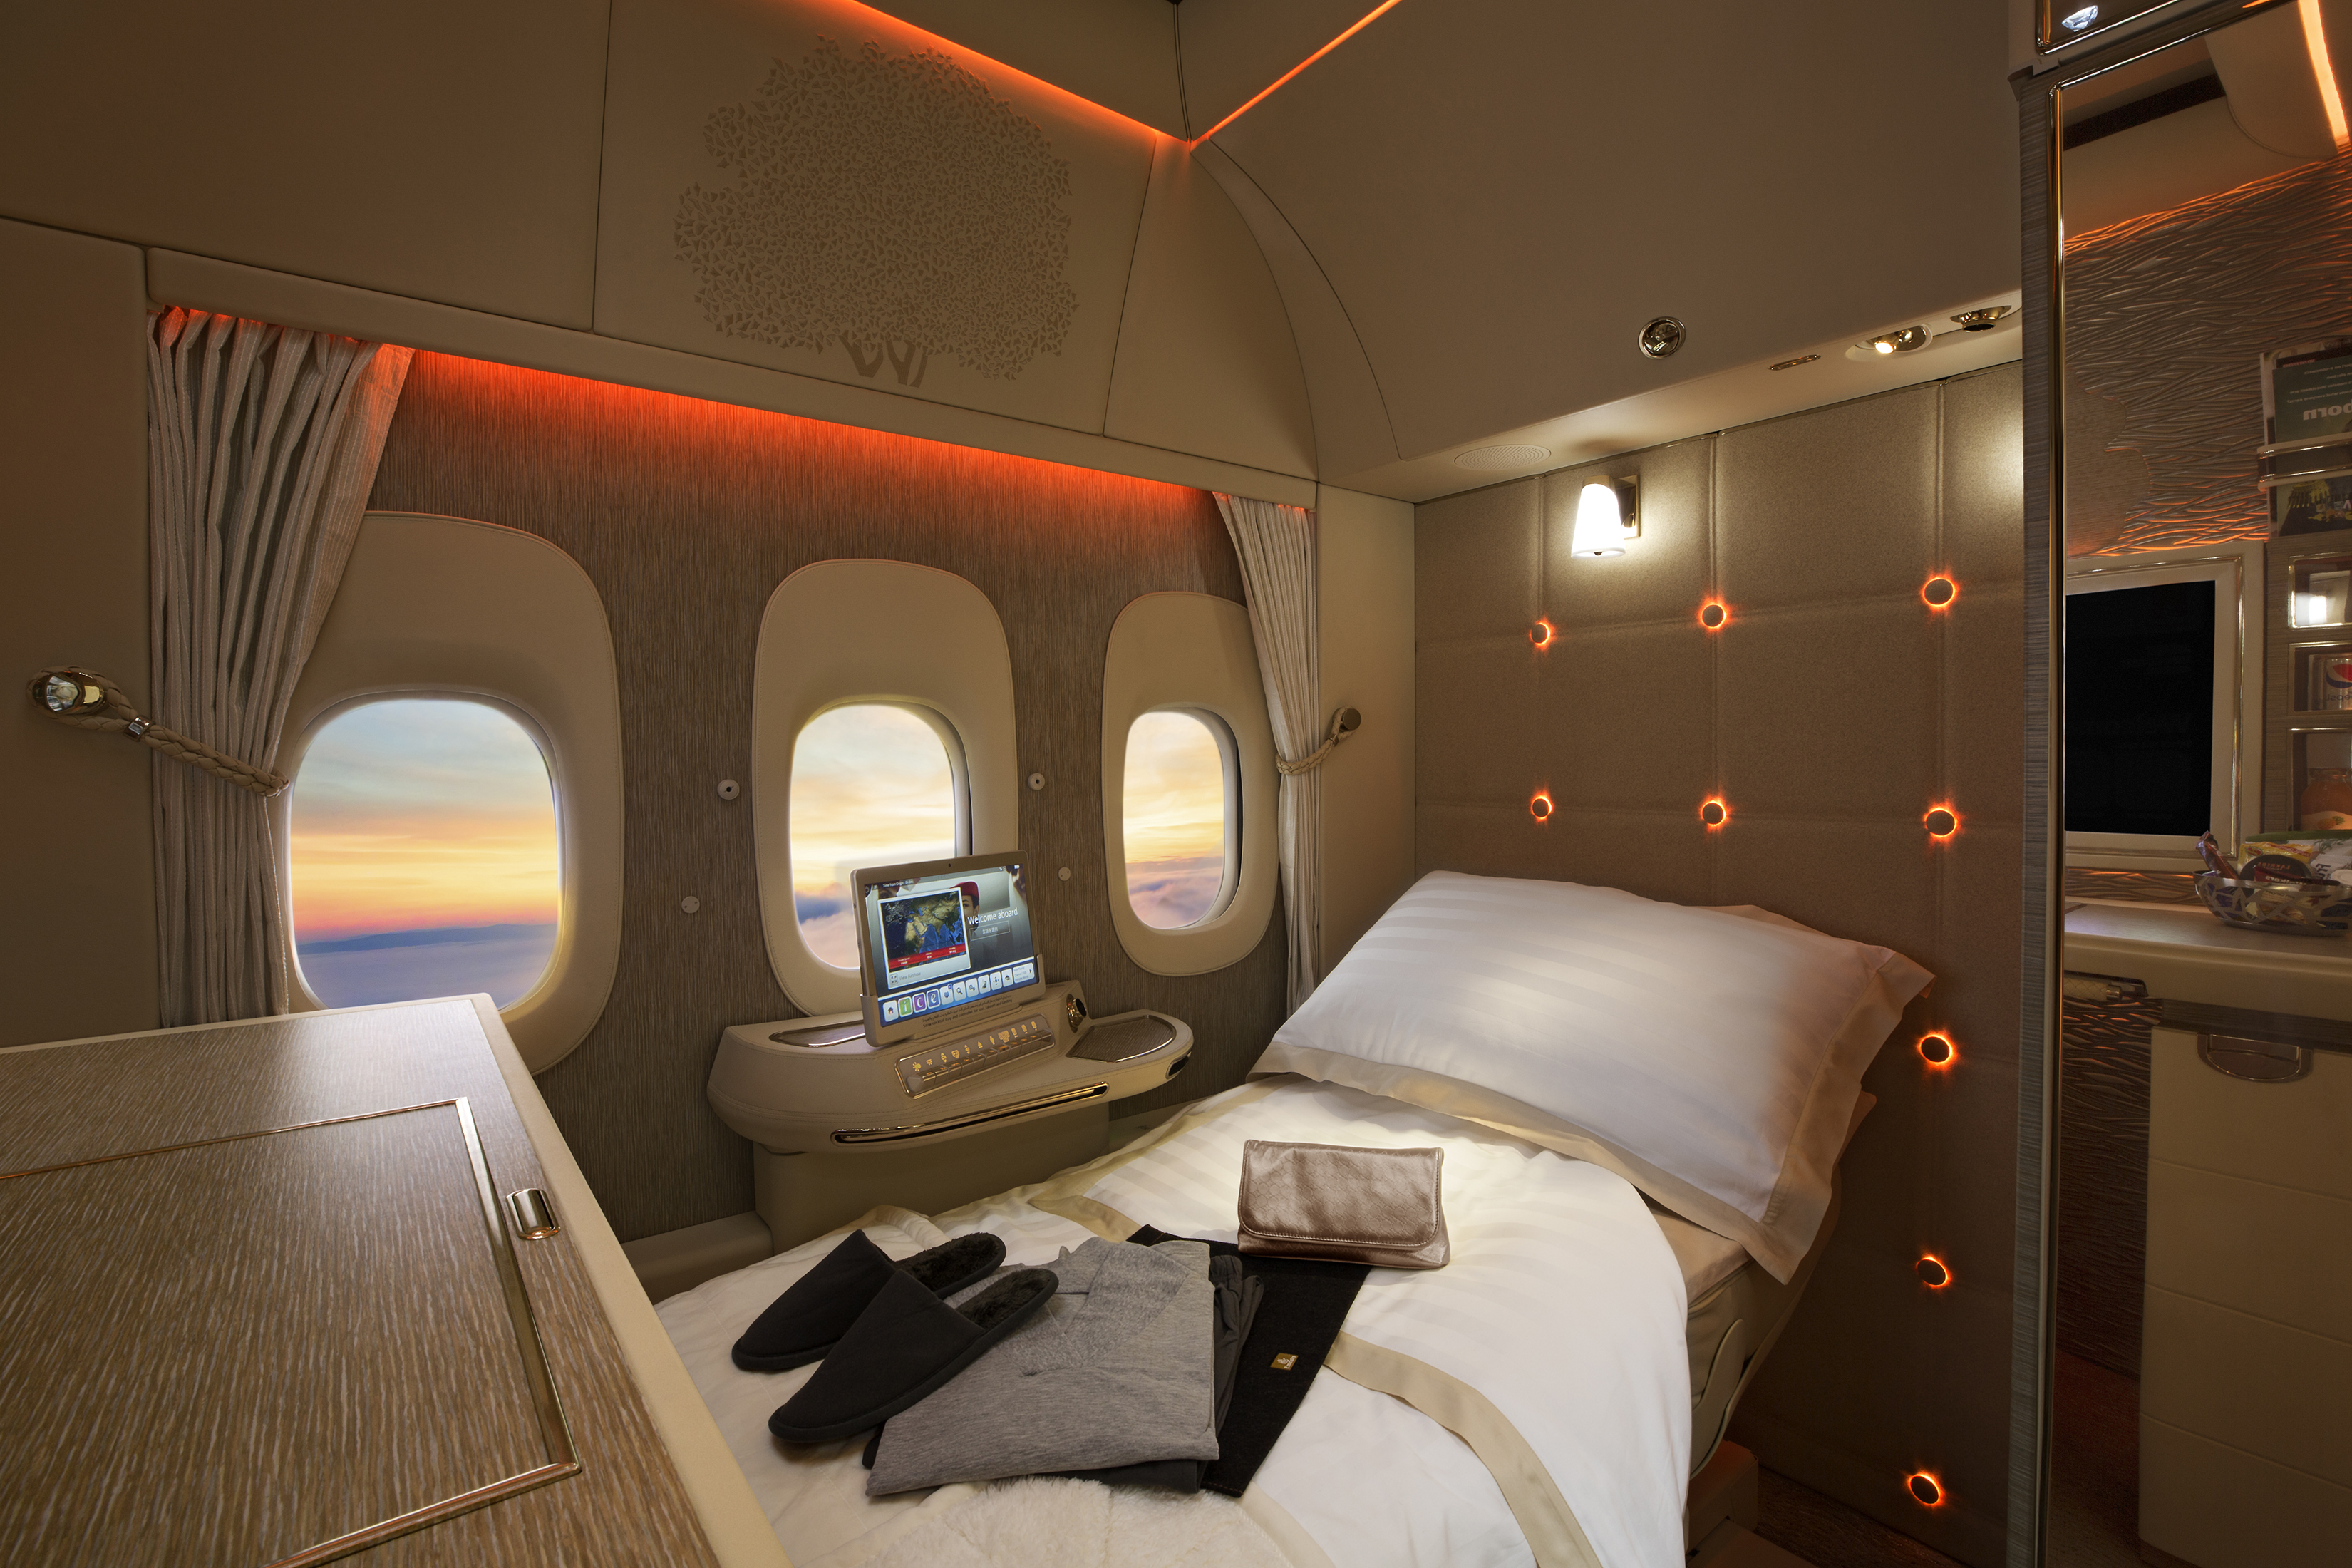 The New Emirates First-Class Suites Are What Dreams Are Made Of